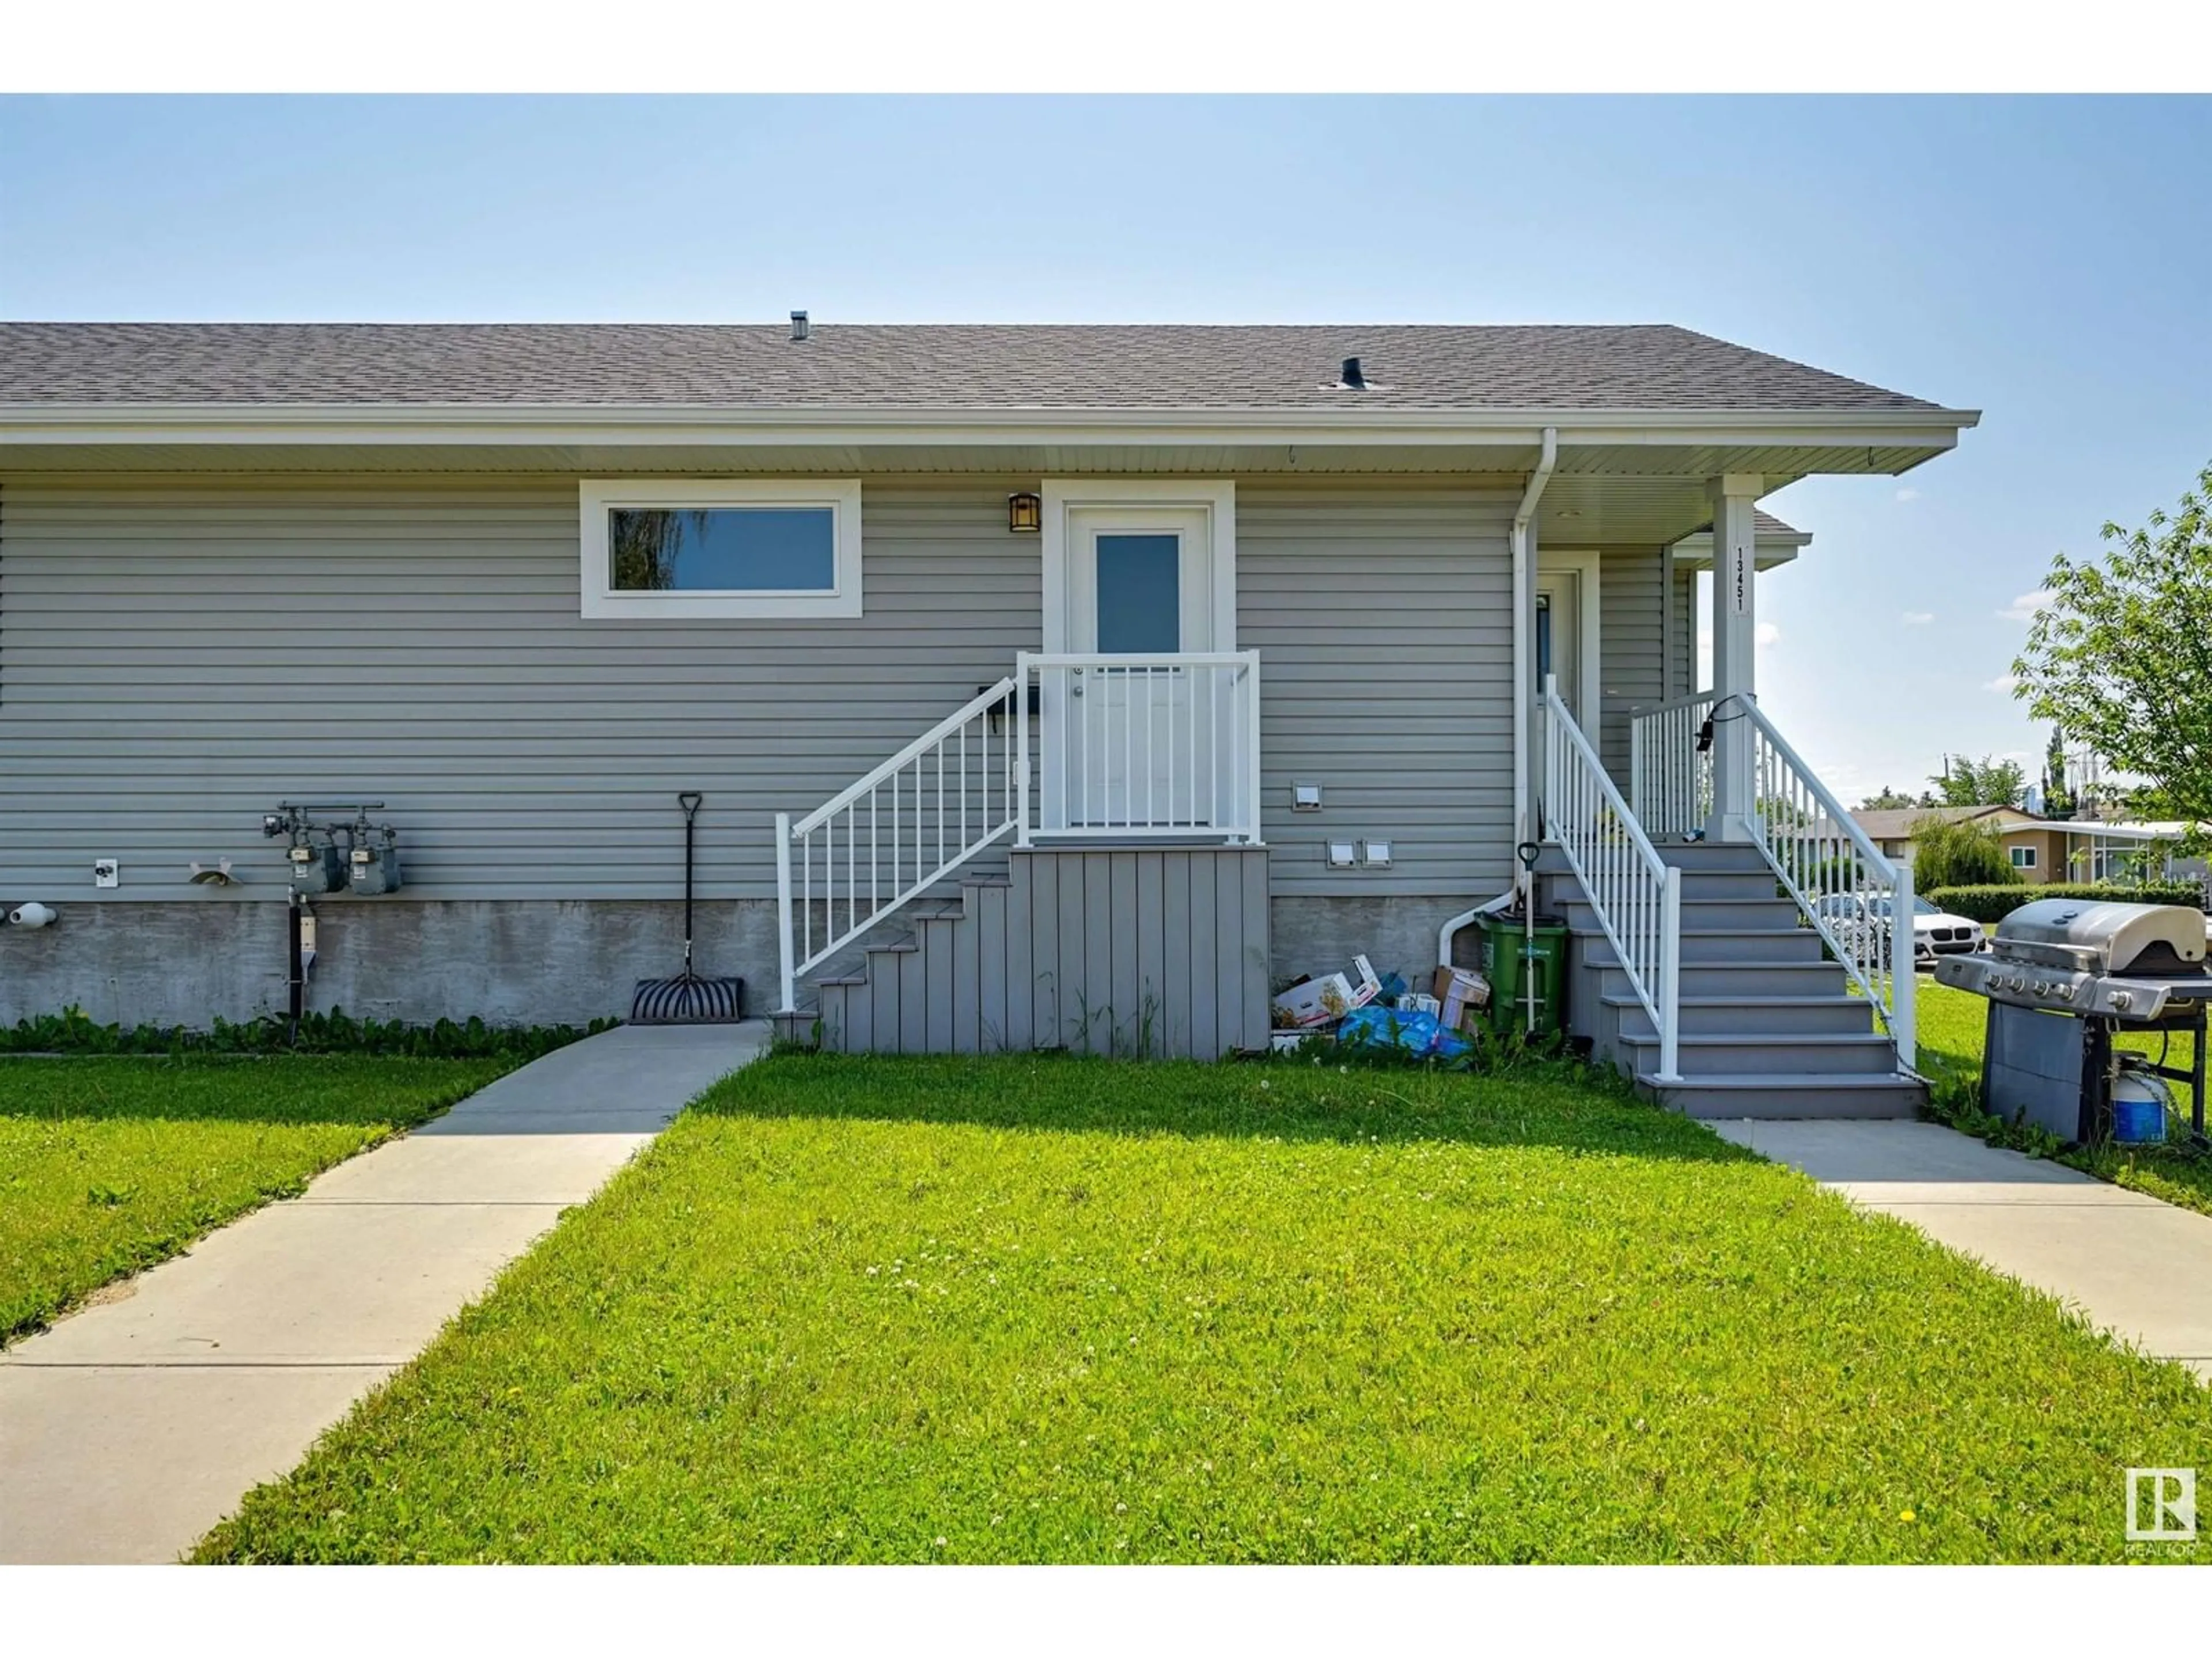 A pic from exterior of the house or condo for 13451 61 ST NW NW, Edmonton Alberta T5A0T4